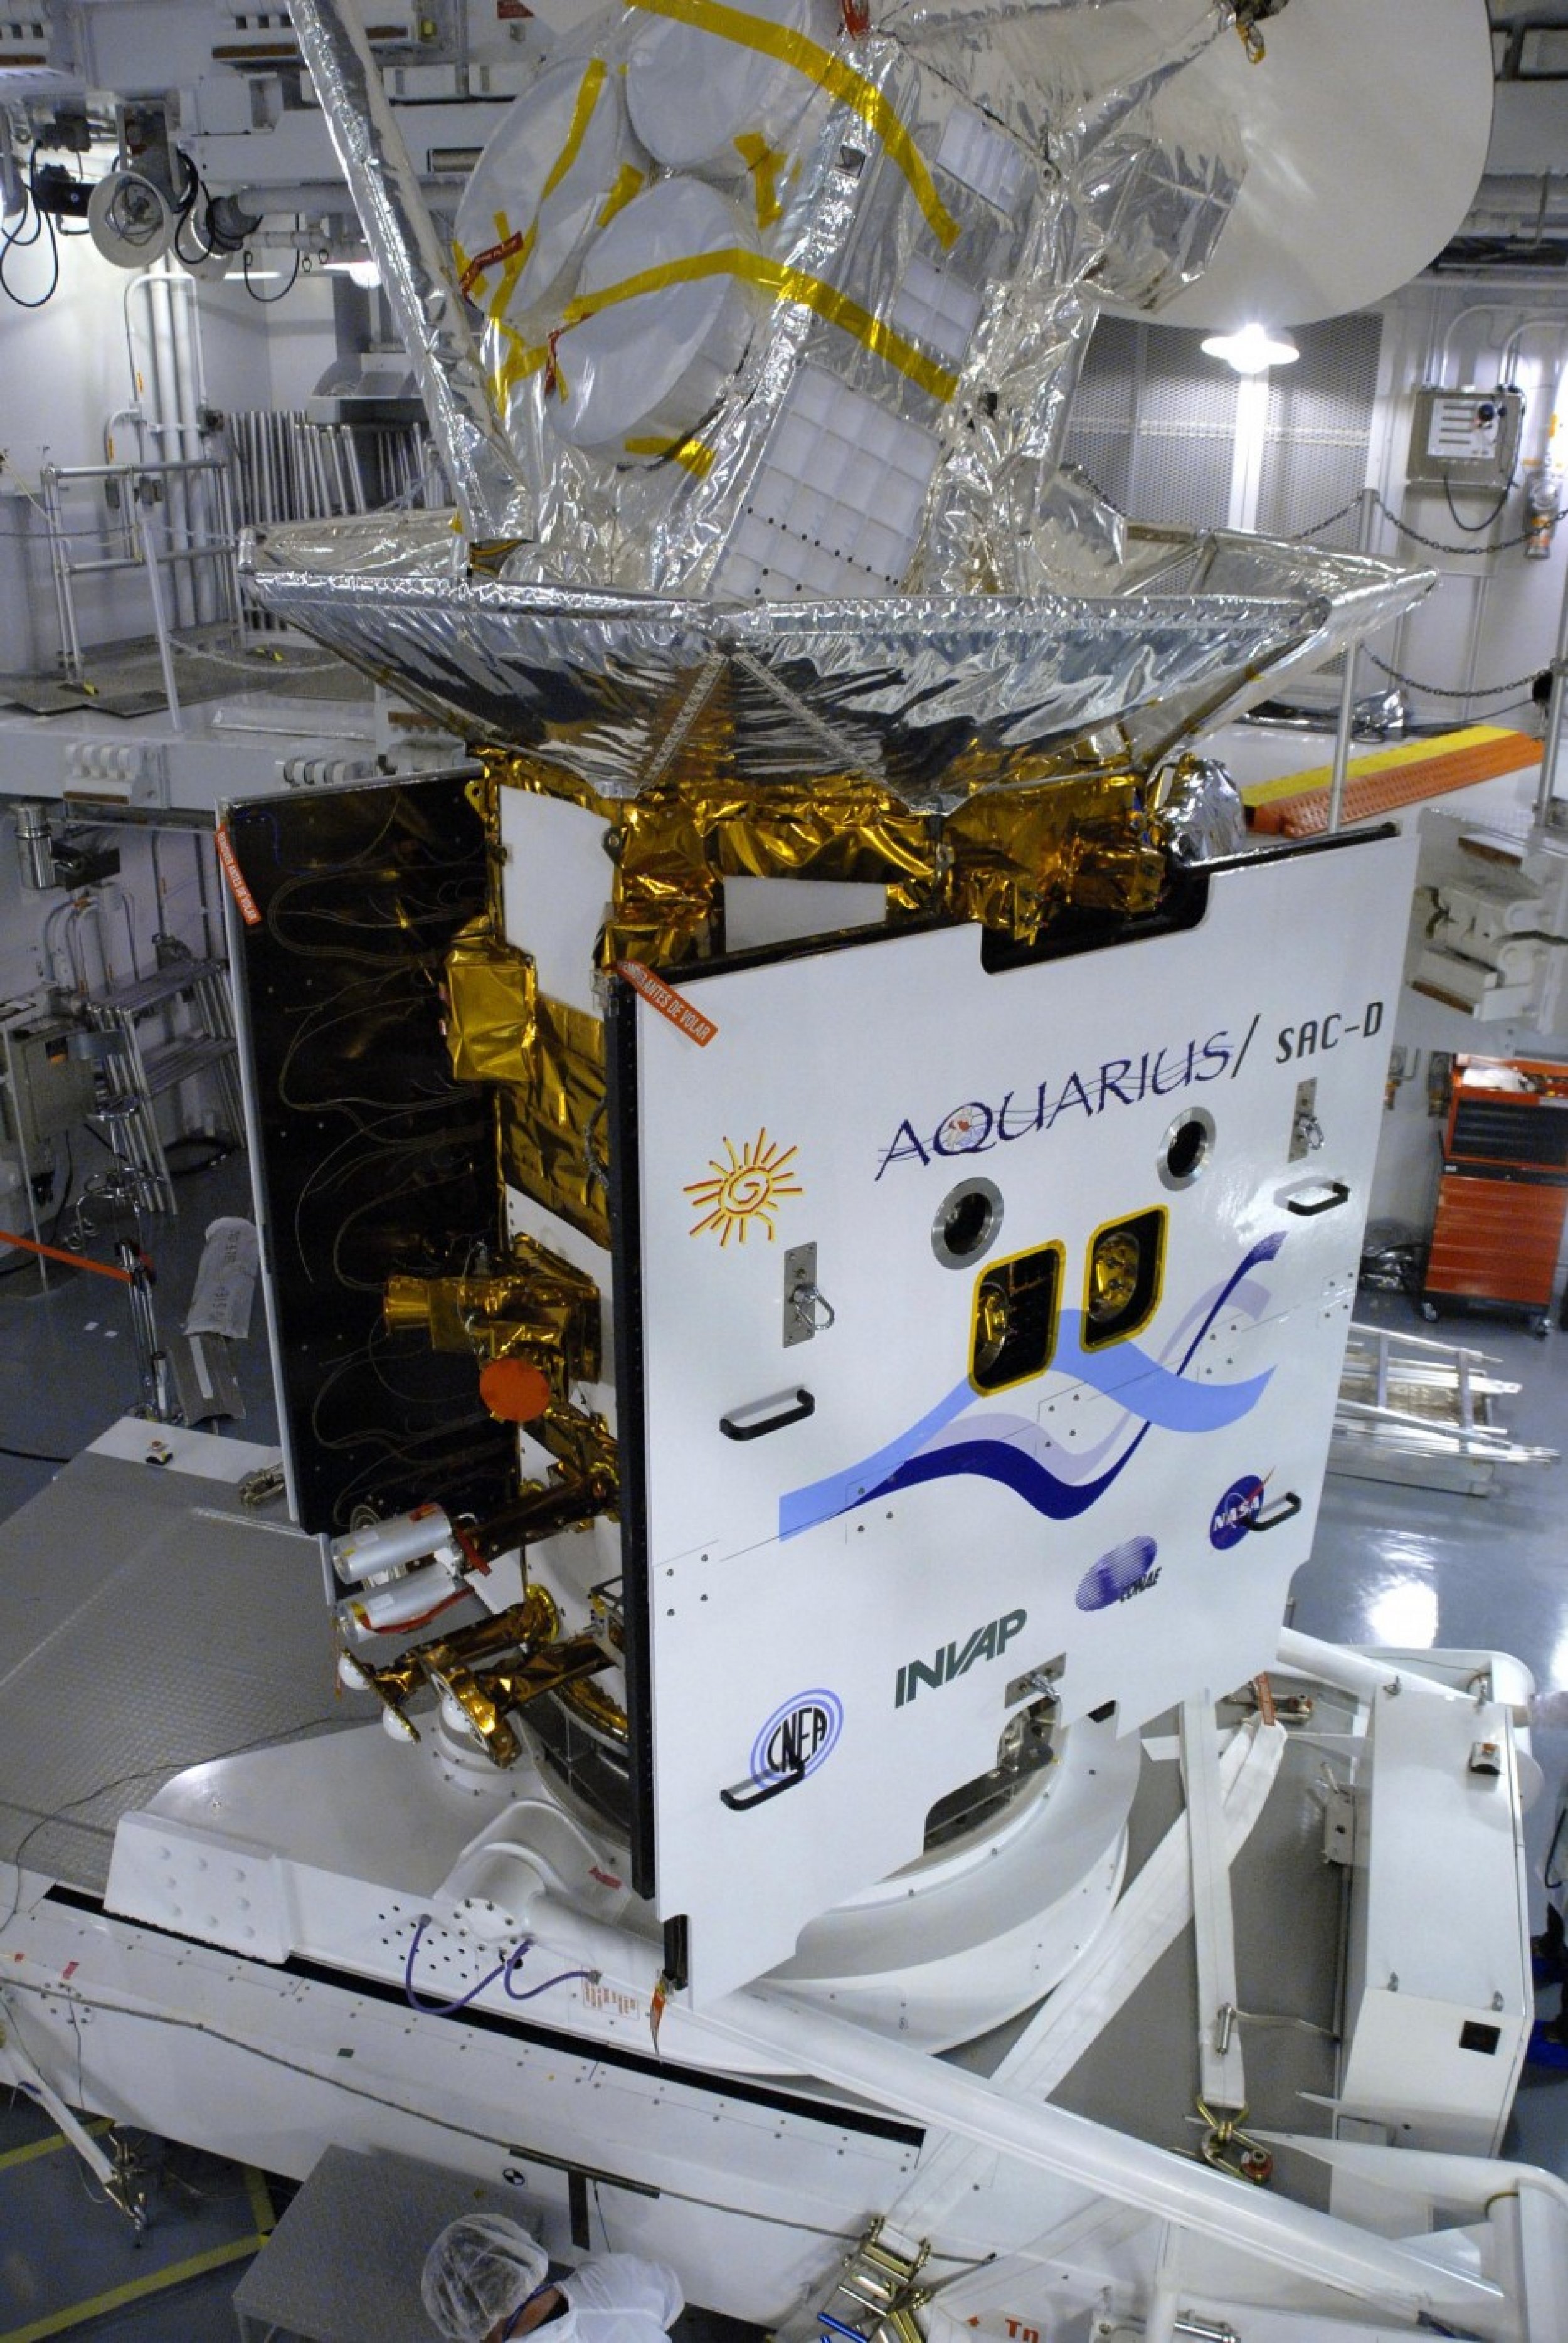 NASA039s AquariusSAC-D spacecraft is rotated for the final time into a vertical position prior to its installation into a transportation canister.